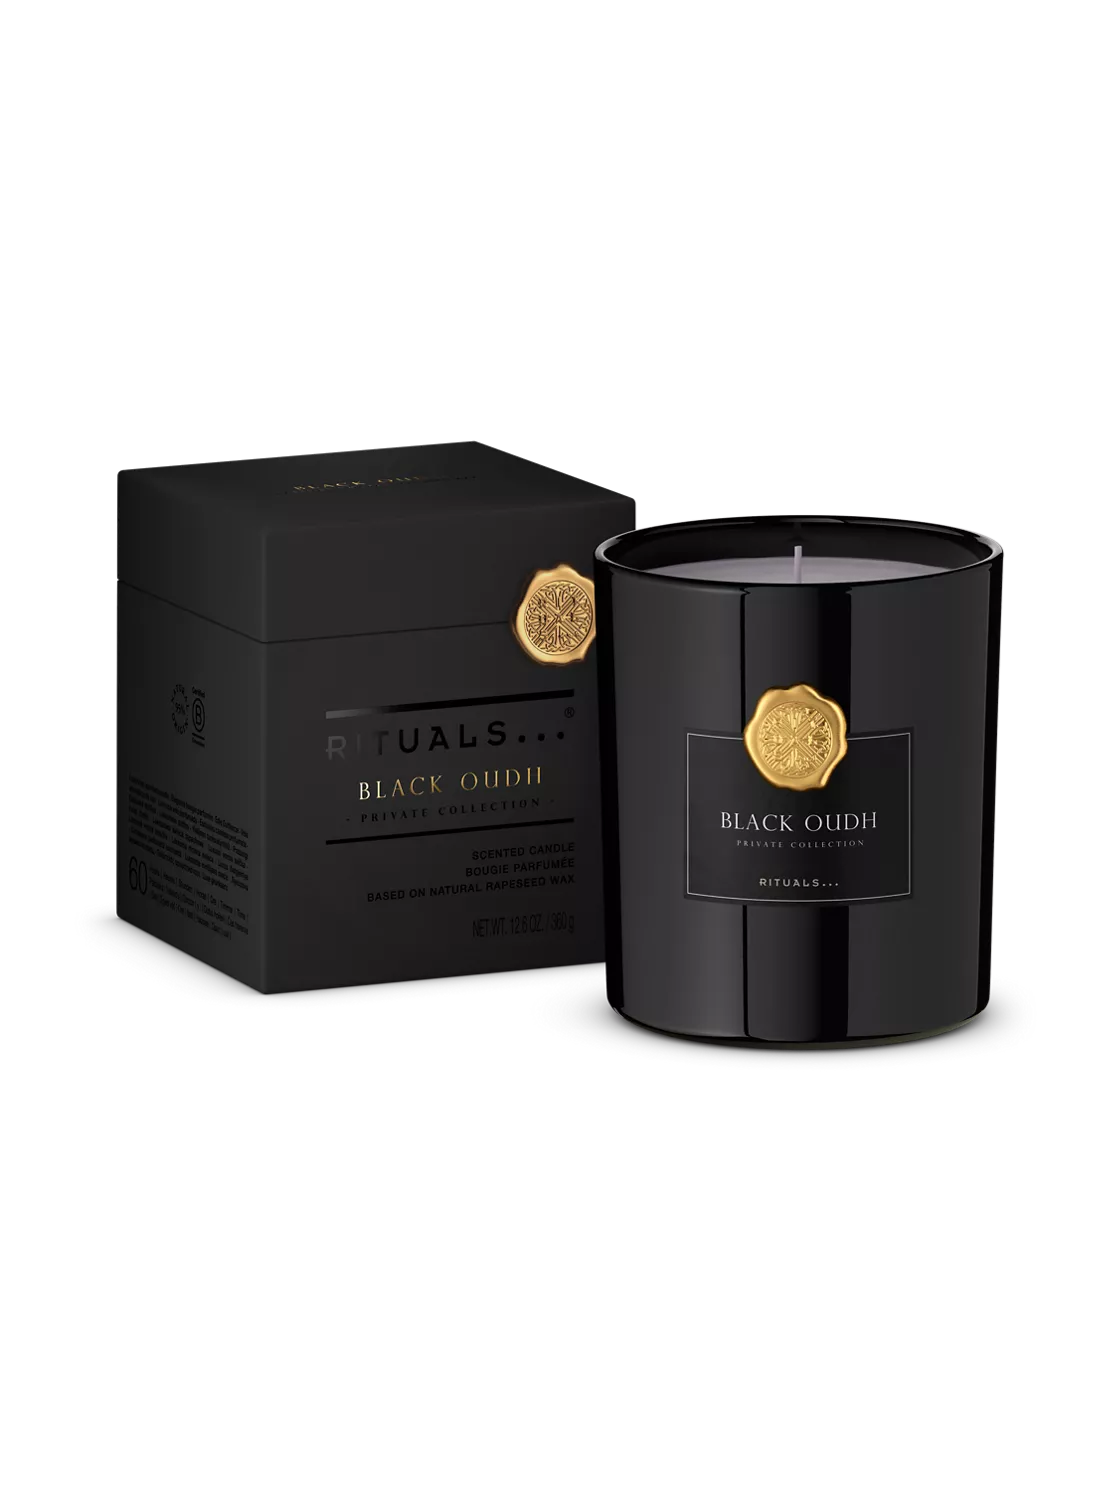 SOLD ** THE RITUAL OF OUDH Scented Candle XL XL luxury scented candle, 1000  gr ** ONLINE ONLY VERSION **, By Passion for Essentials